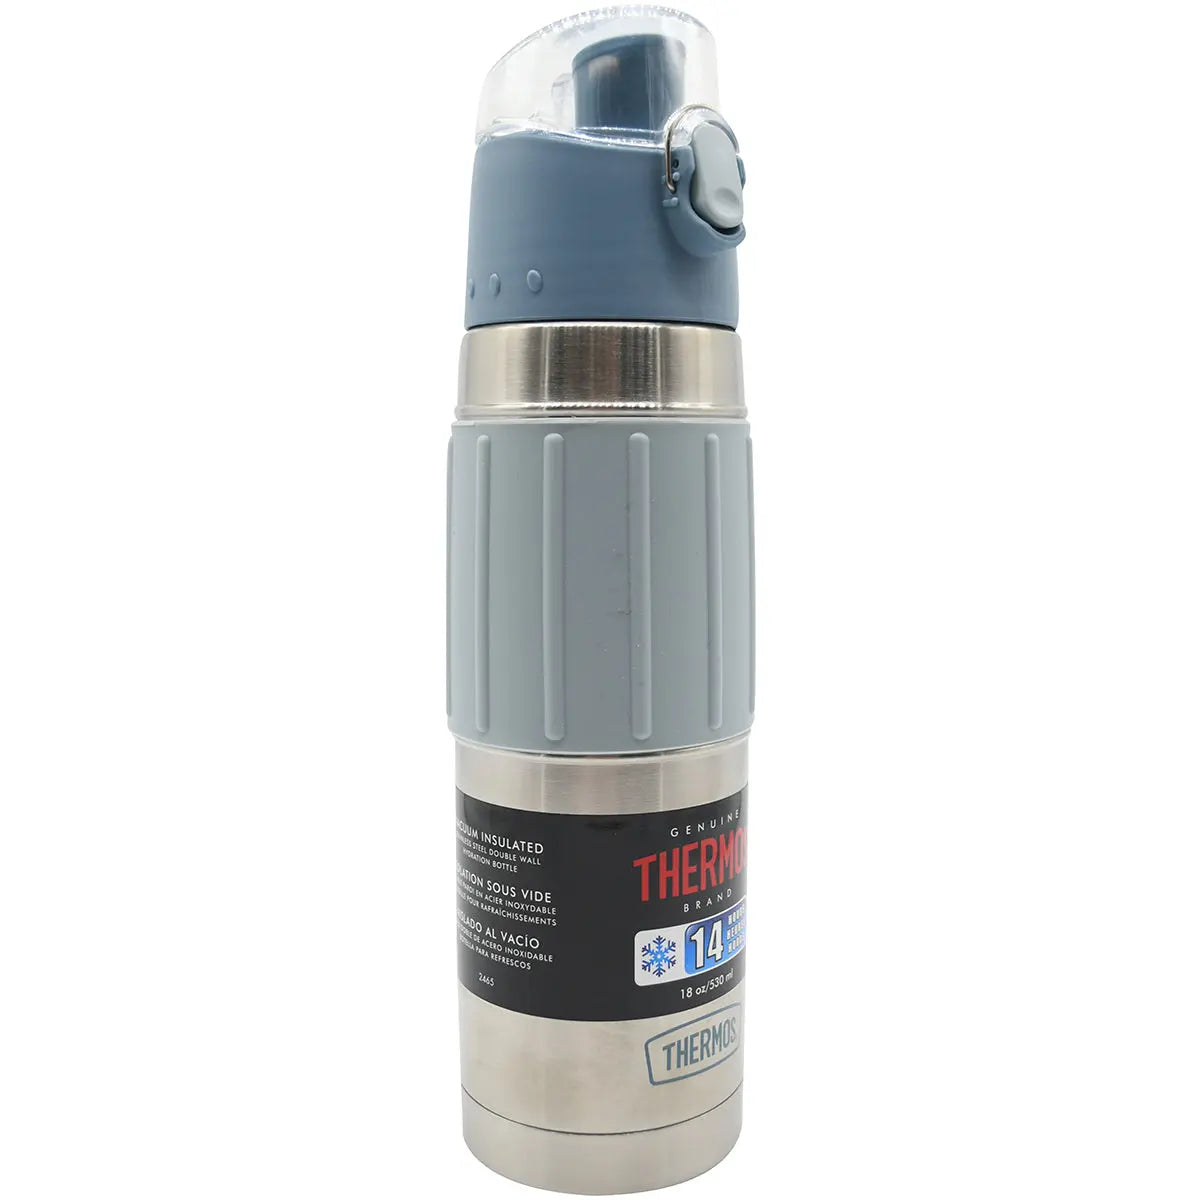 Thermos 18 oz. Vacuum Insulated Stainless Steel Water Bottle - Silver/Gray Thermos